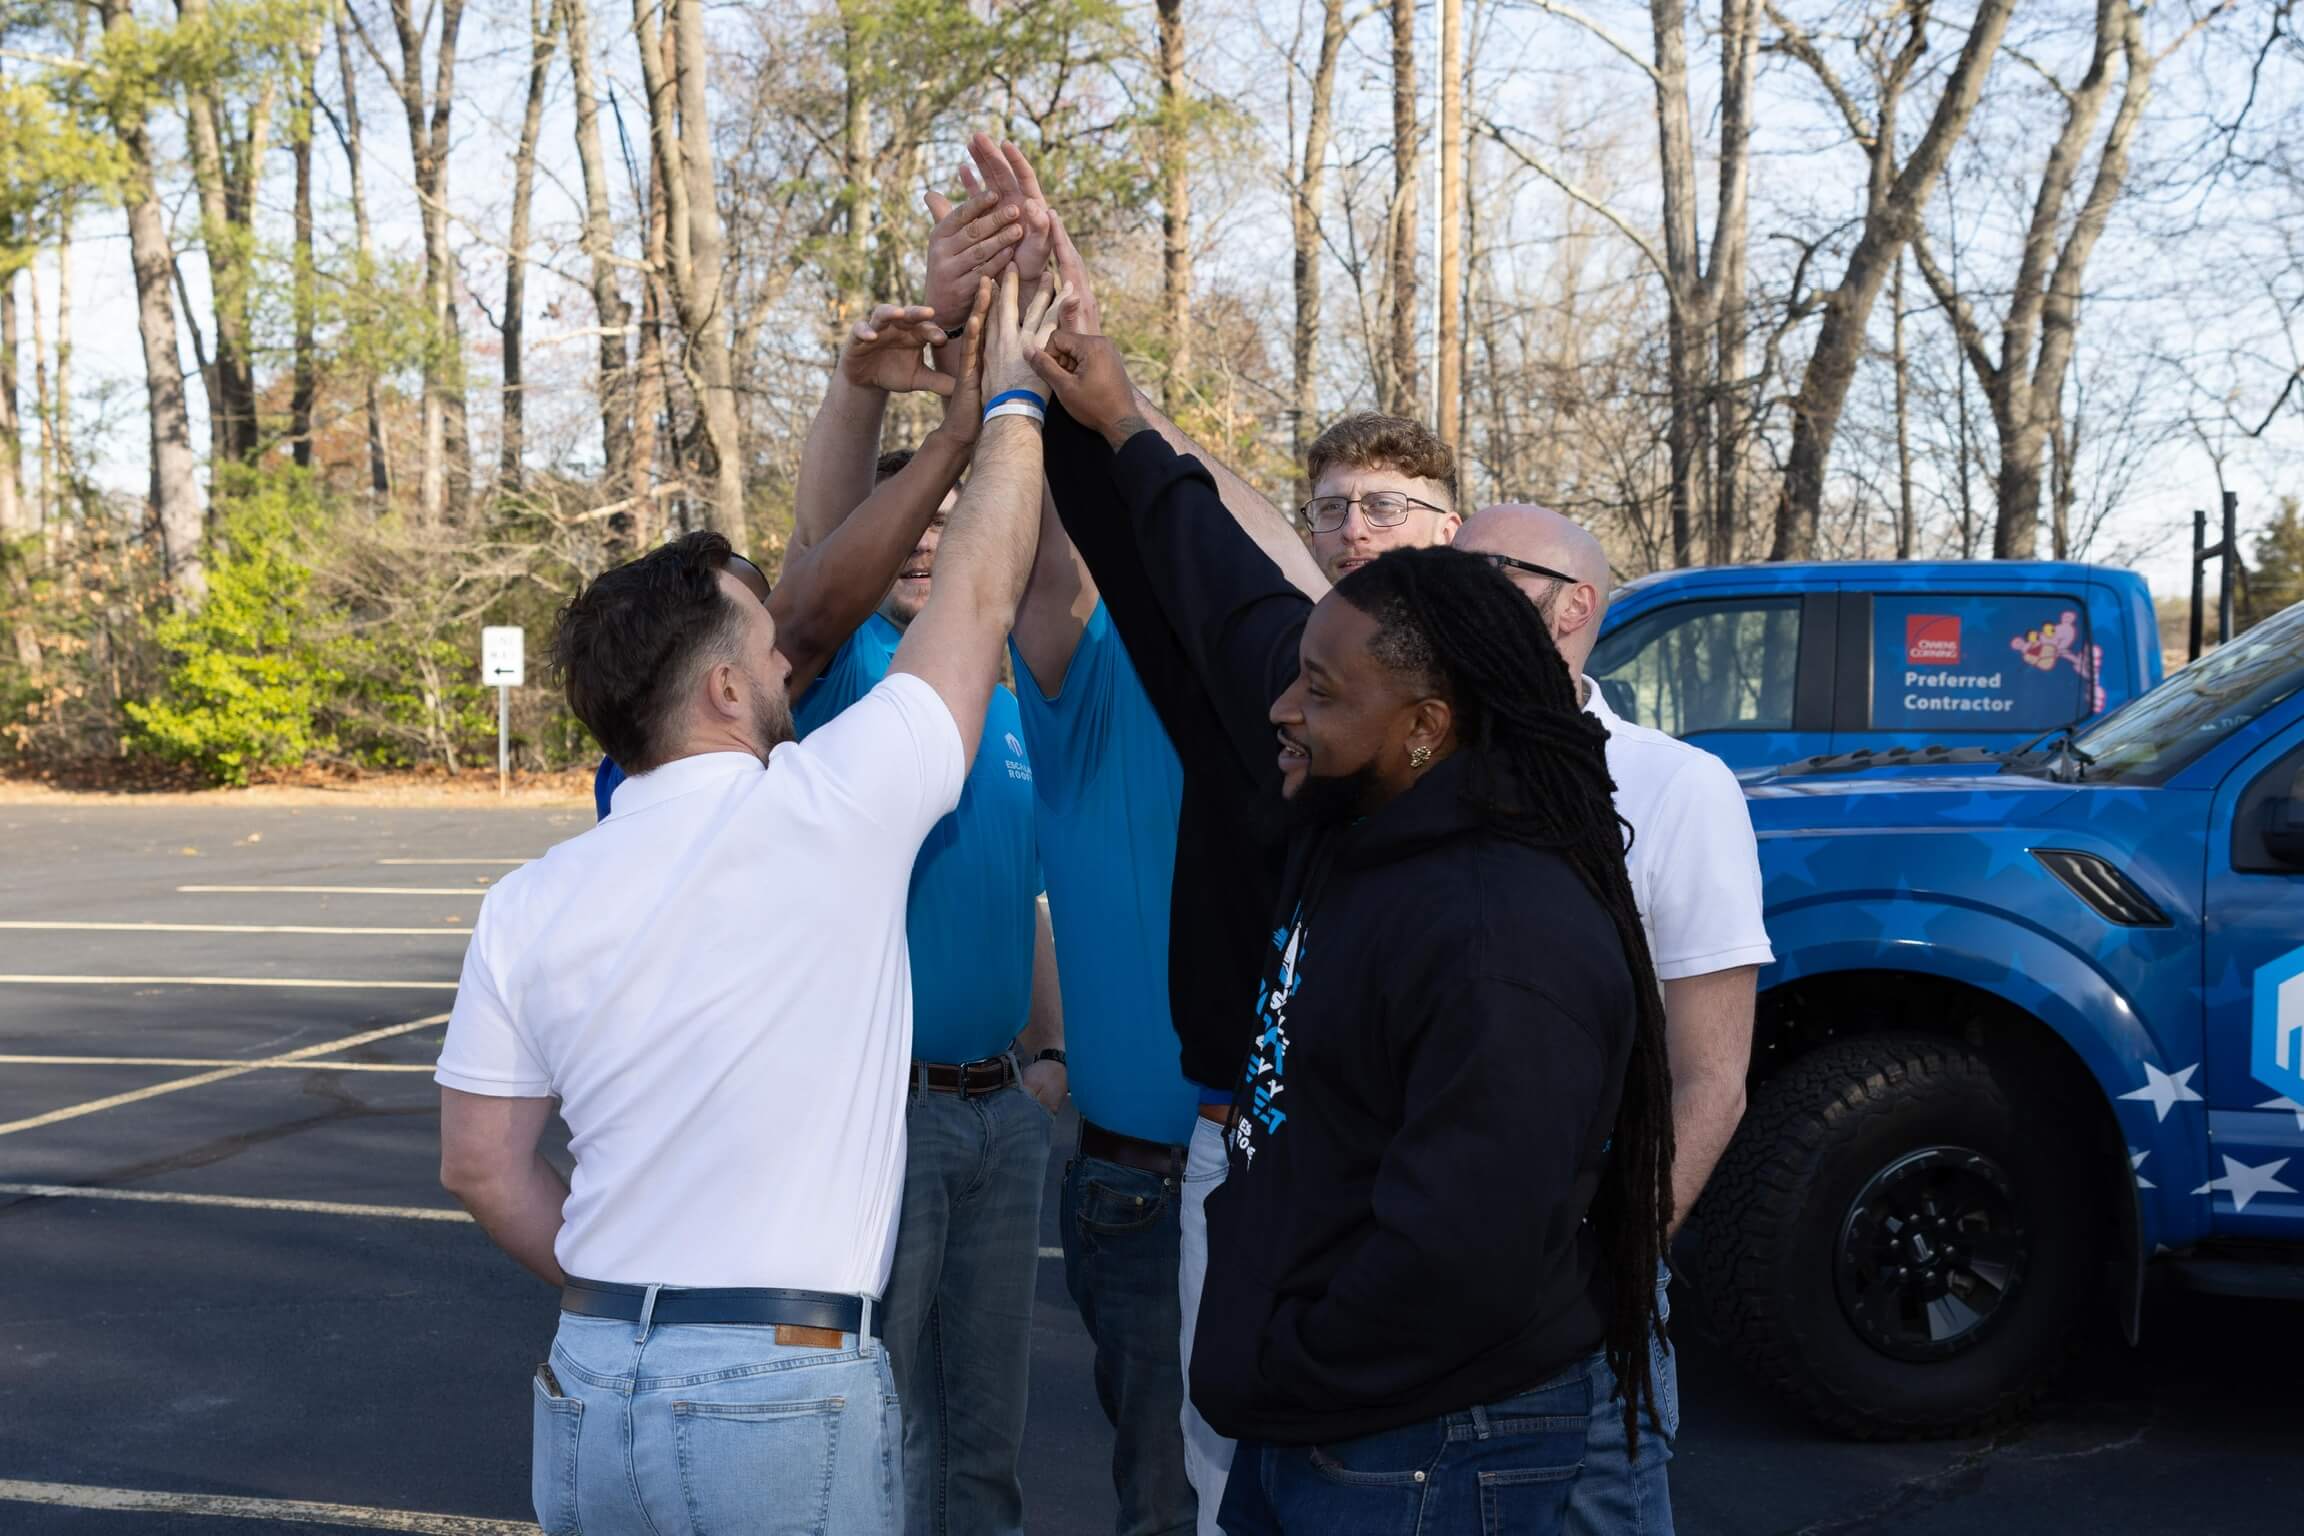 escalade roofing professional roofers team huddle charlotte nc